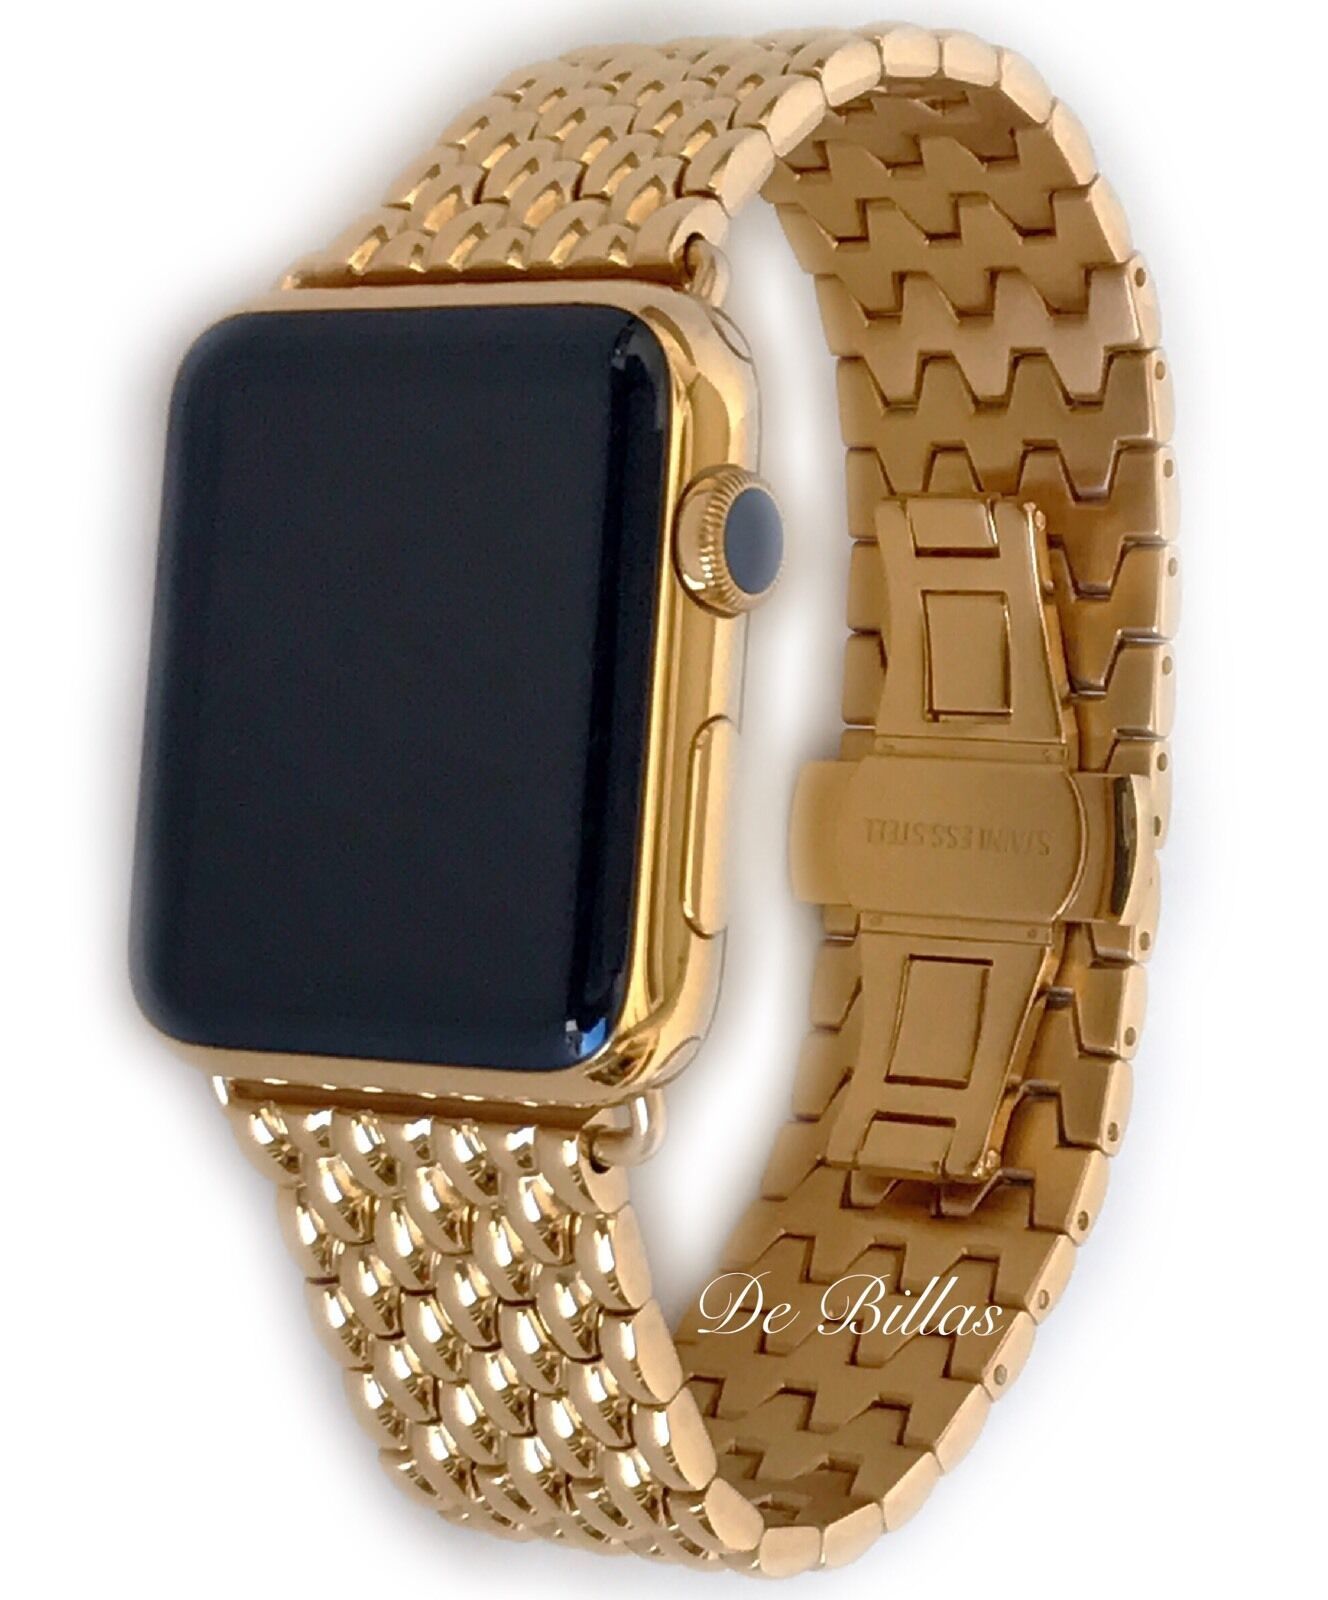 Primary image for 24K Gold Plated 42MM Apple Watch Gen 1 24K Gold Links Butterfly Band